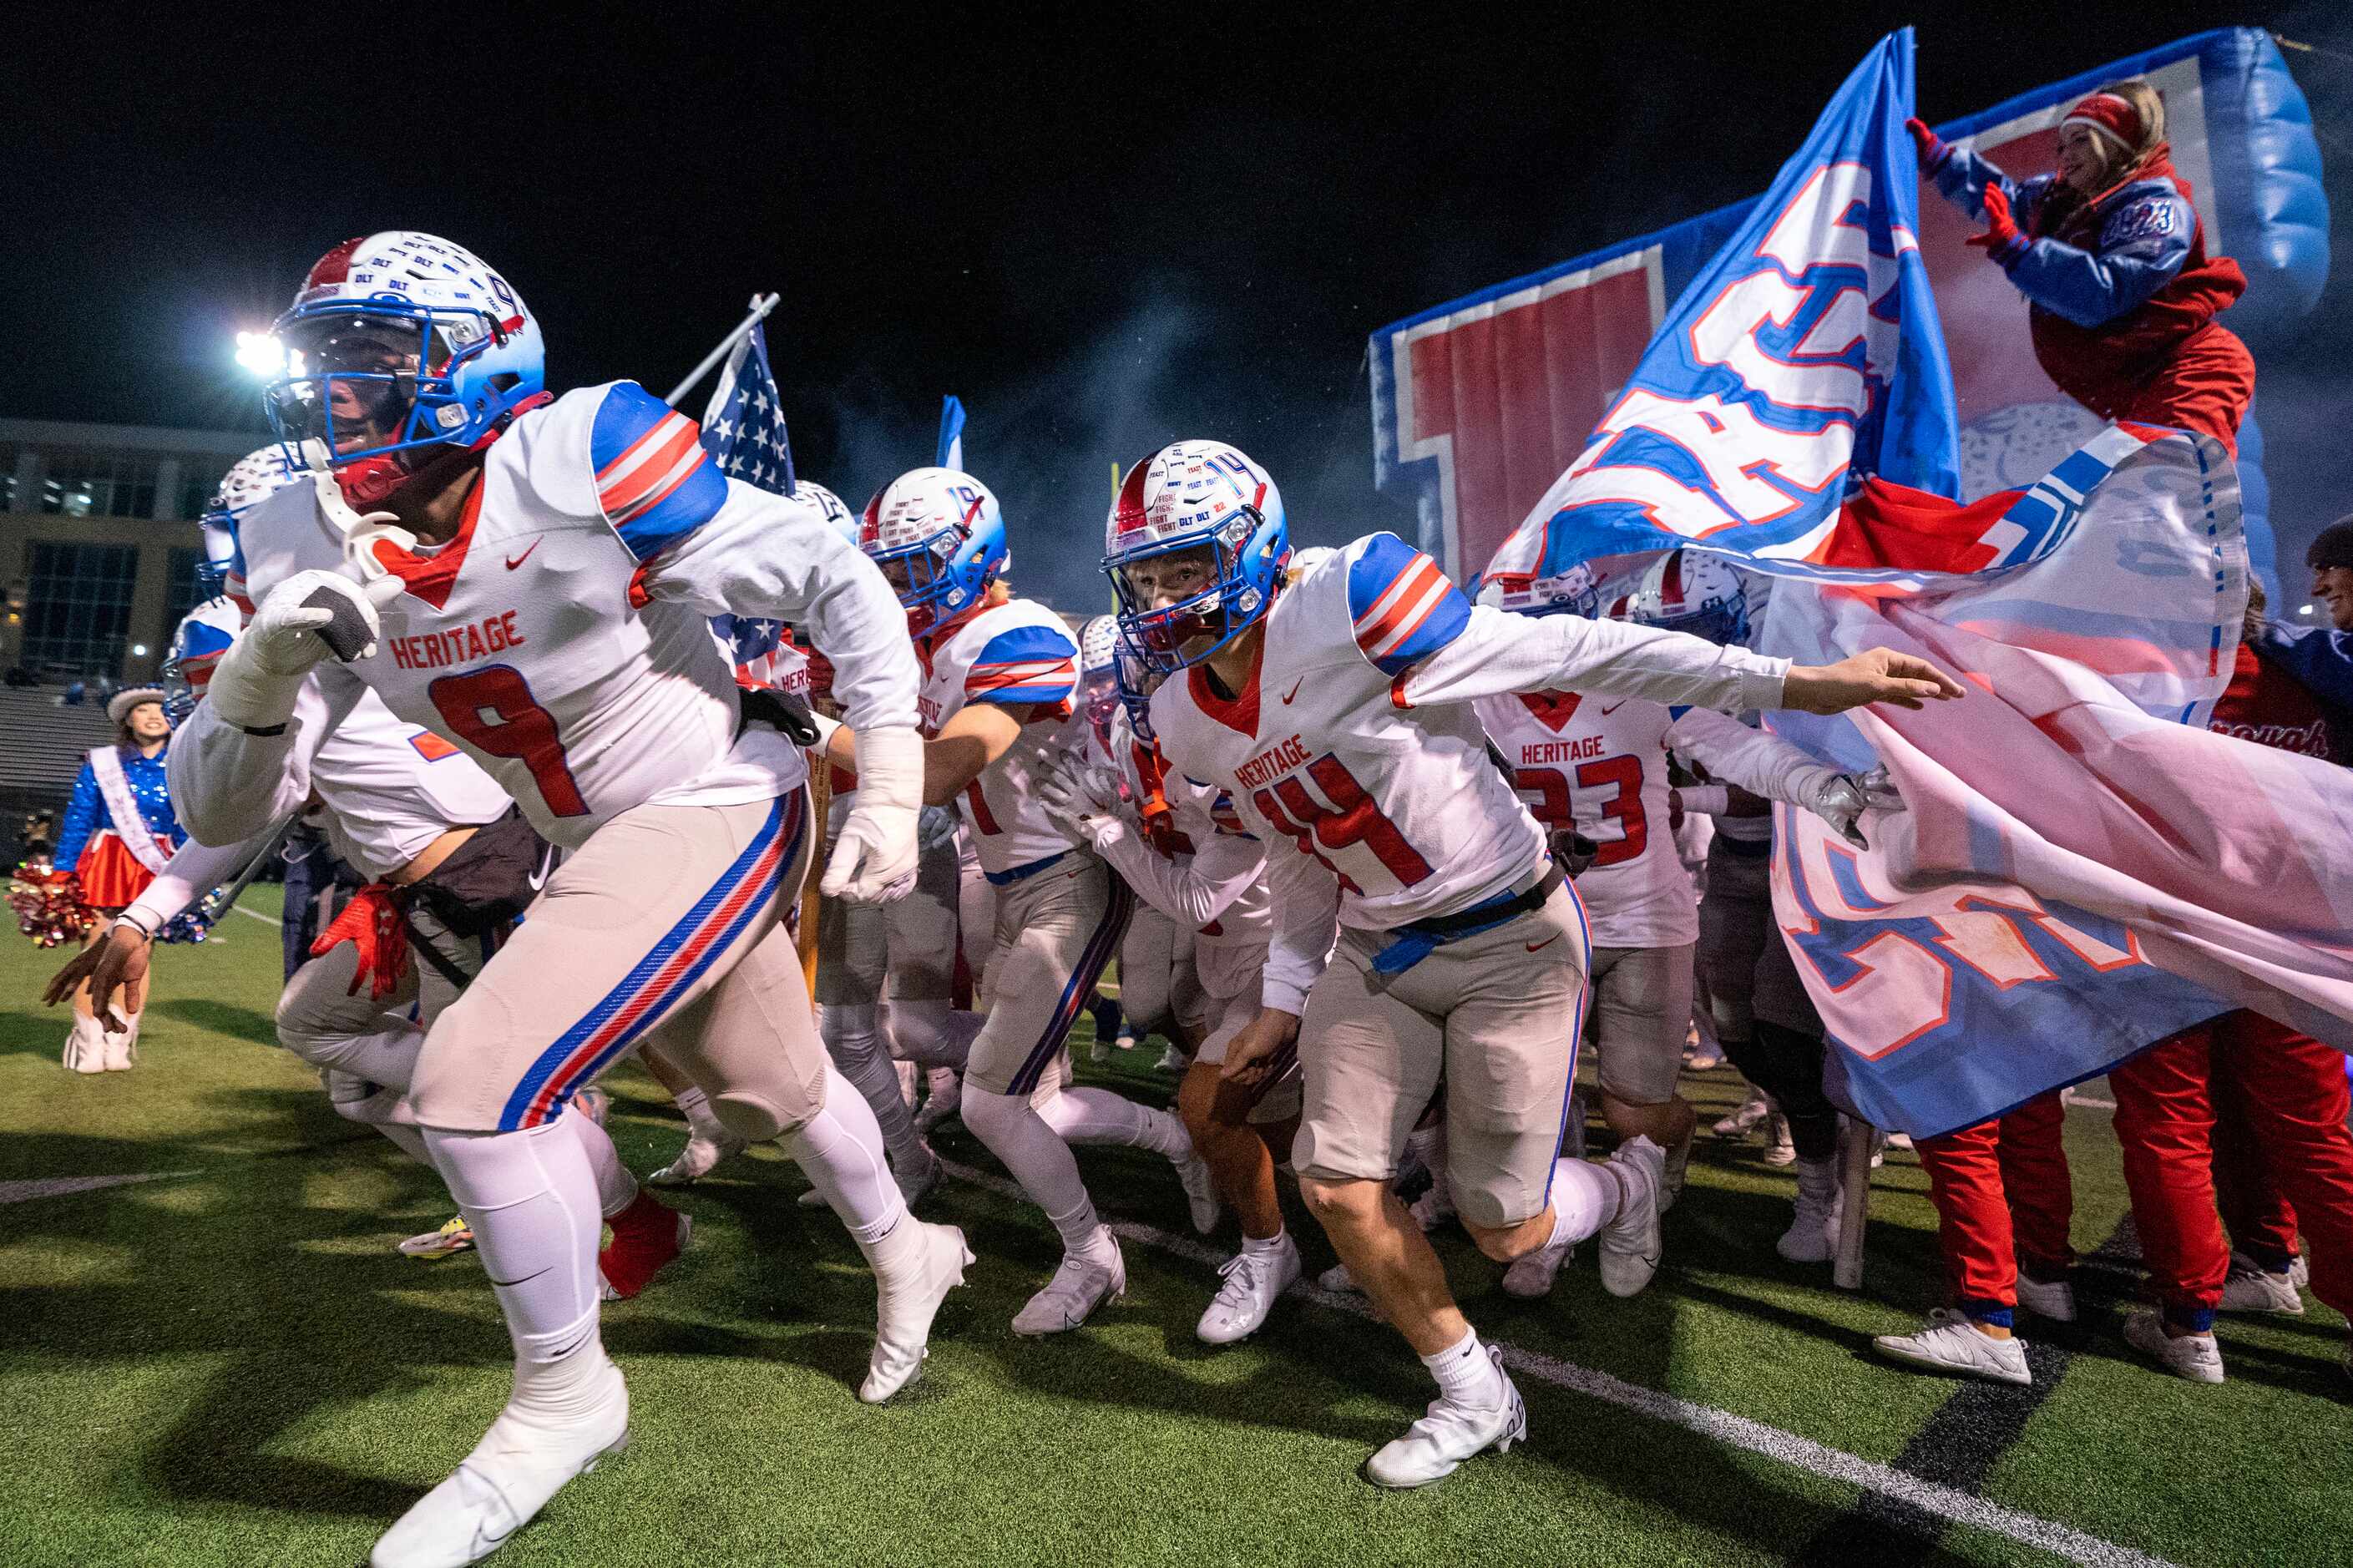 Midlothian Heritage takes the field before a high school football game against Crandall on...